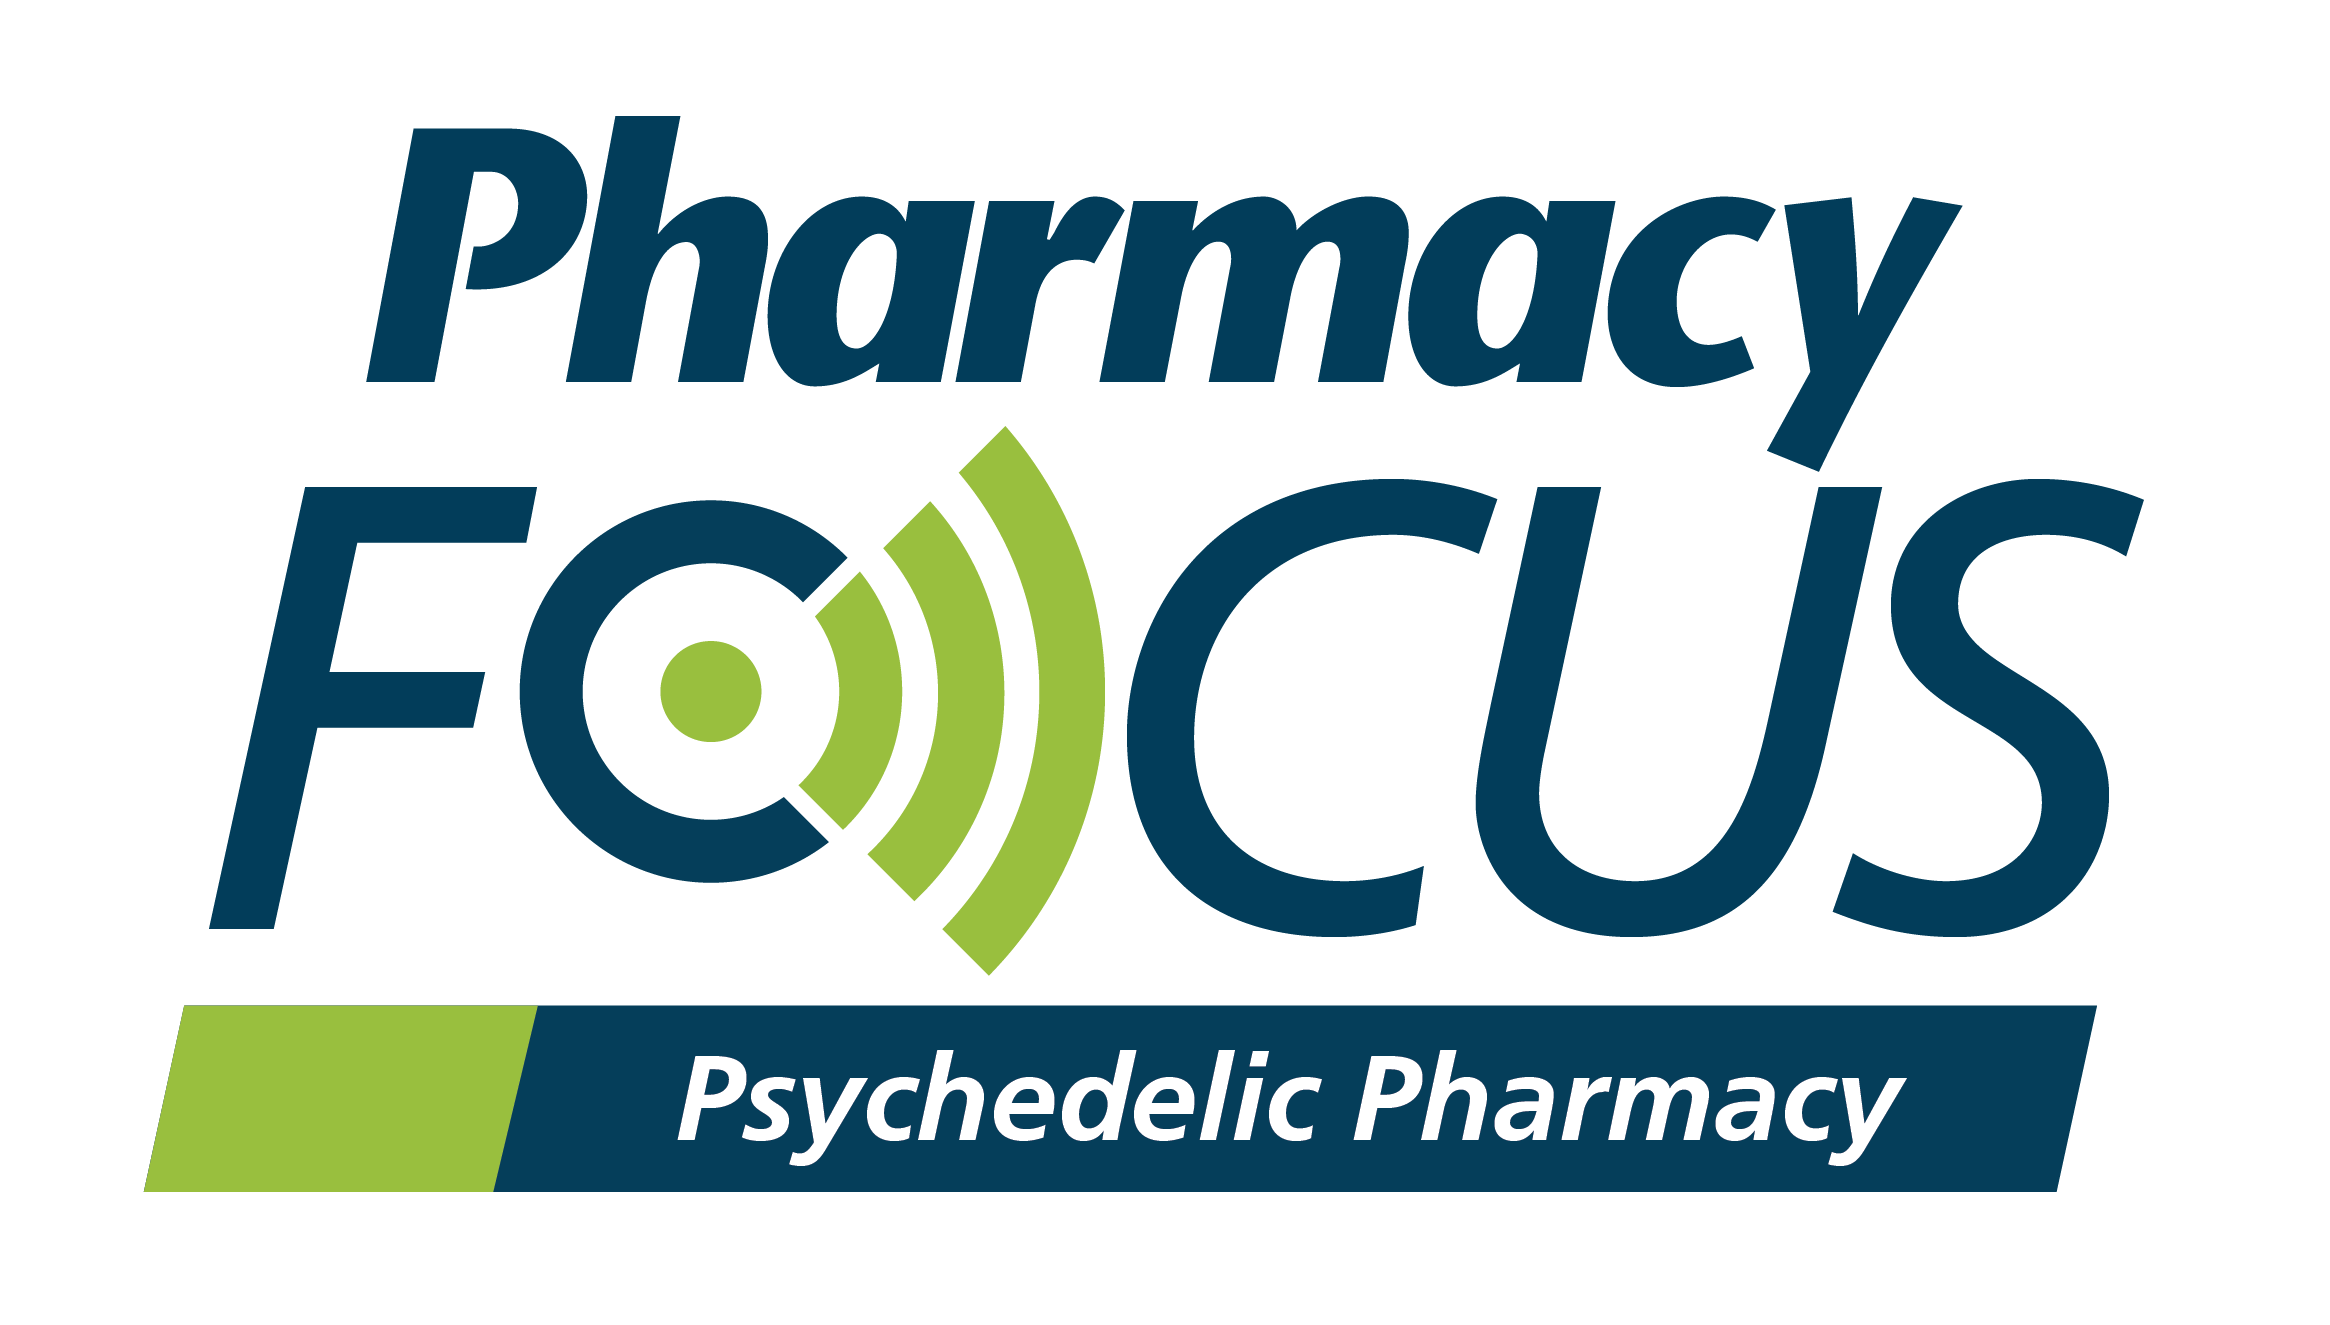 Pharmacy Focus Podcast: New Series - Psychedelic Pharmacy